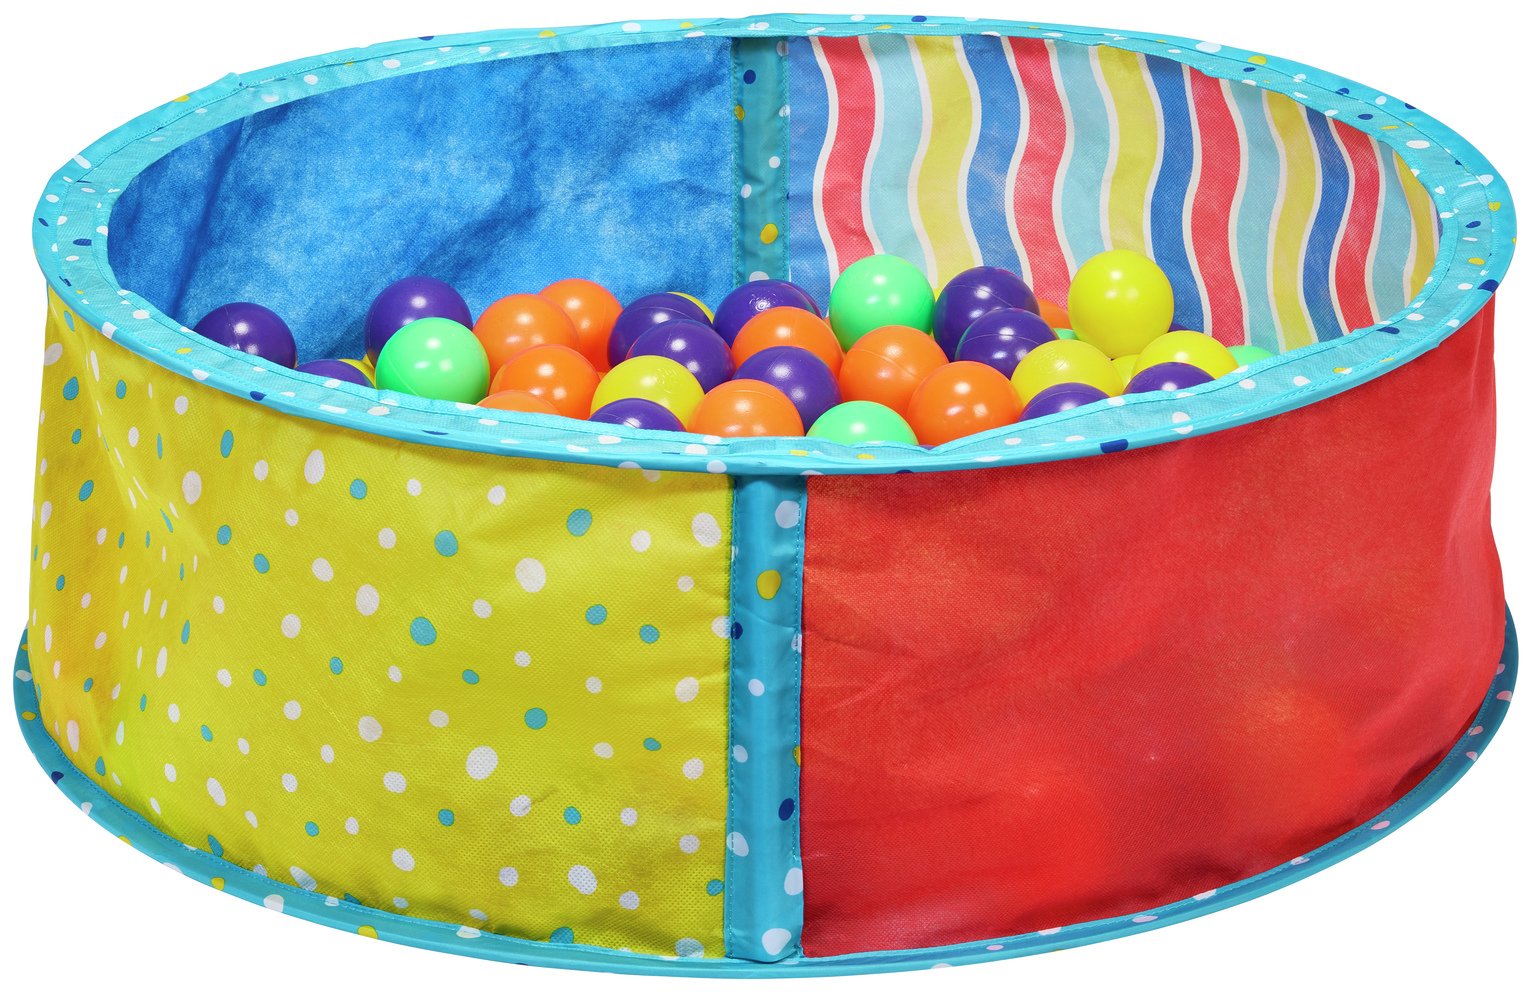 Chad Valley Indoor Ball Pit Activity Toy